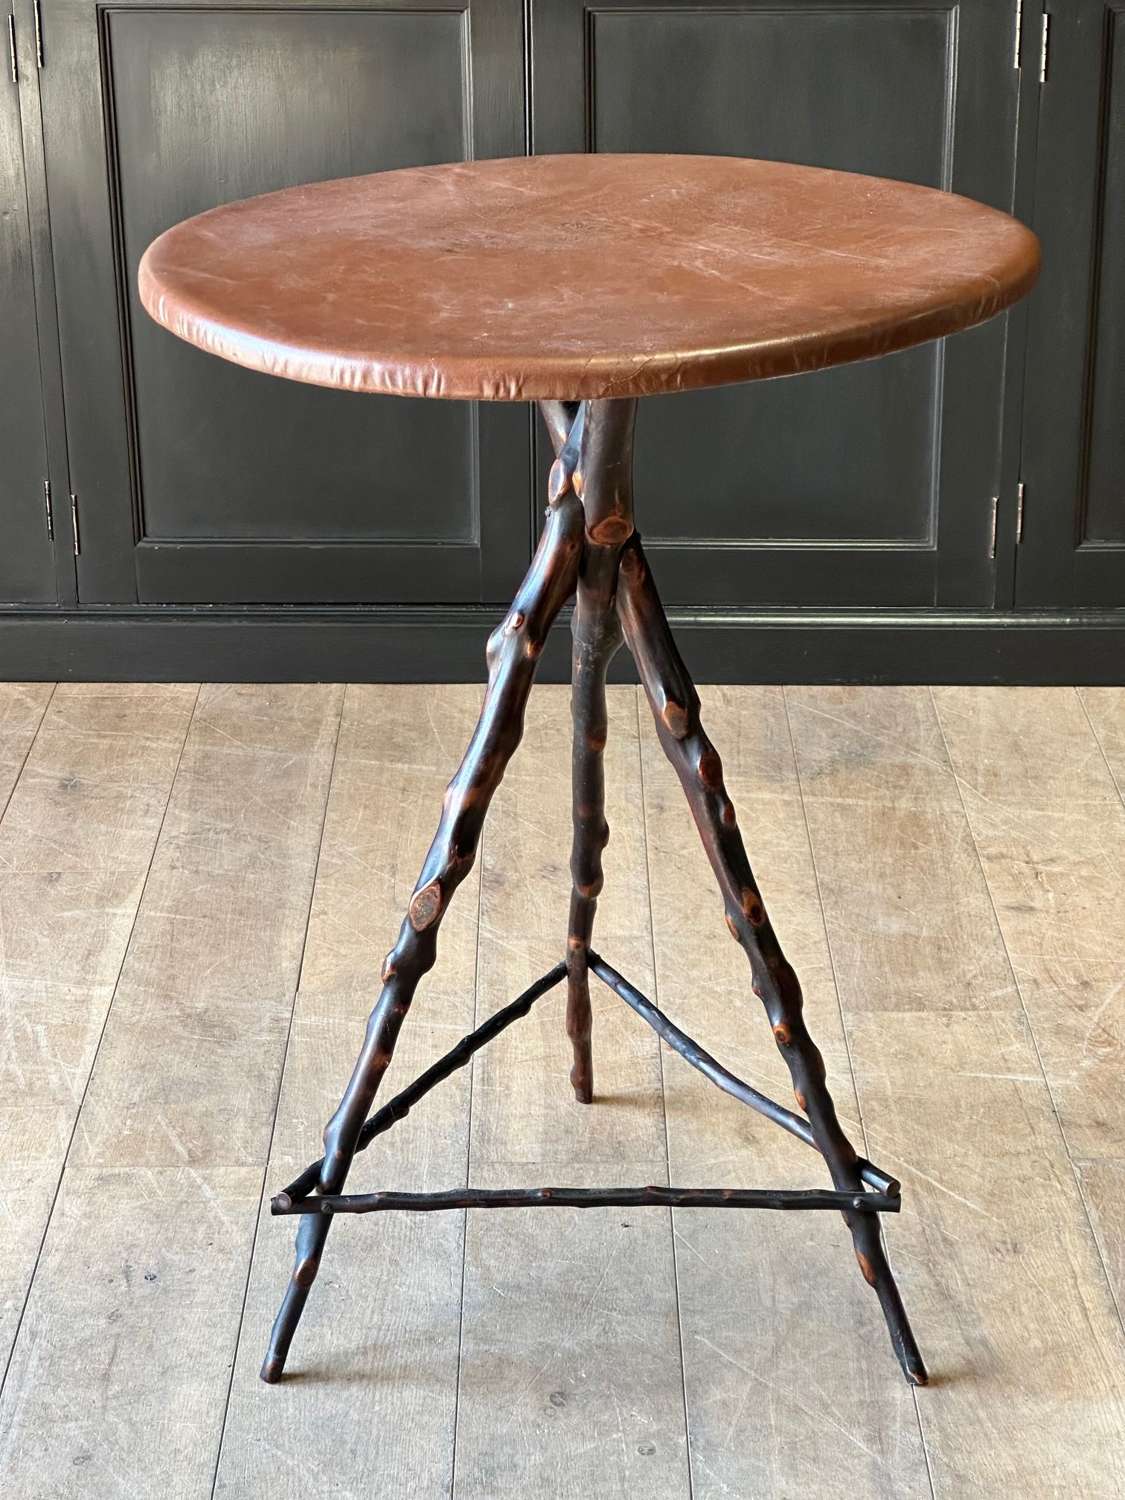 C1870 A Charming French Yew Wood Twig Occasional Table